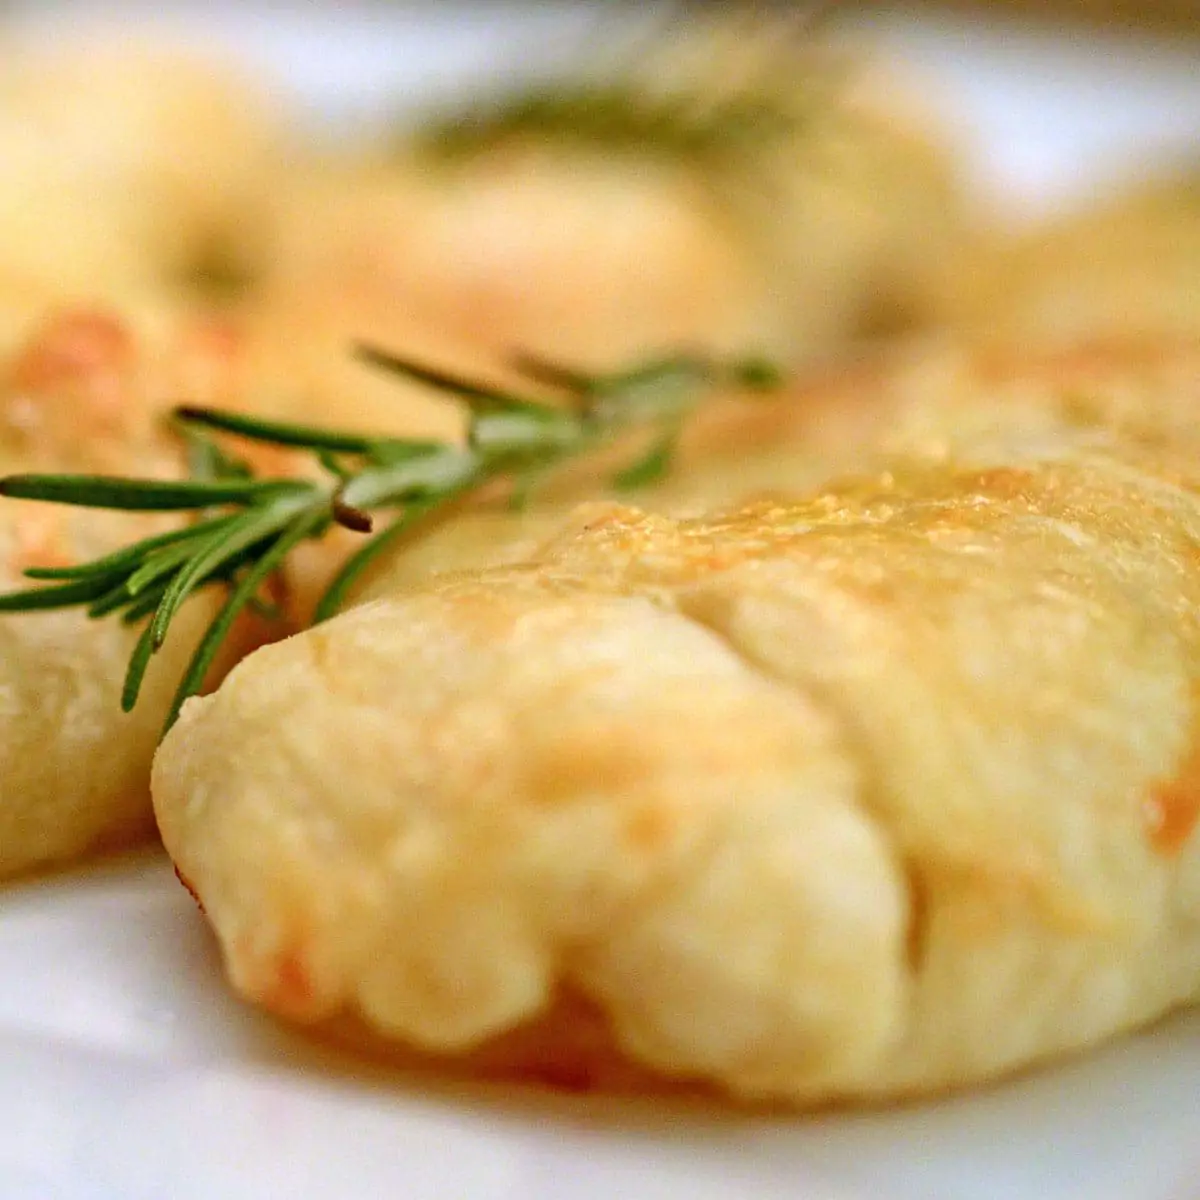 Puff pastry wrapped around salmon.